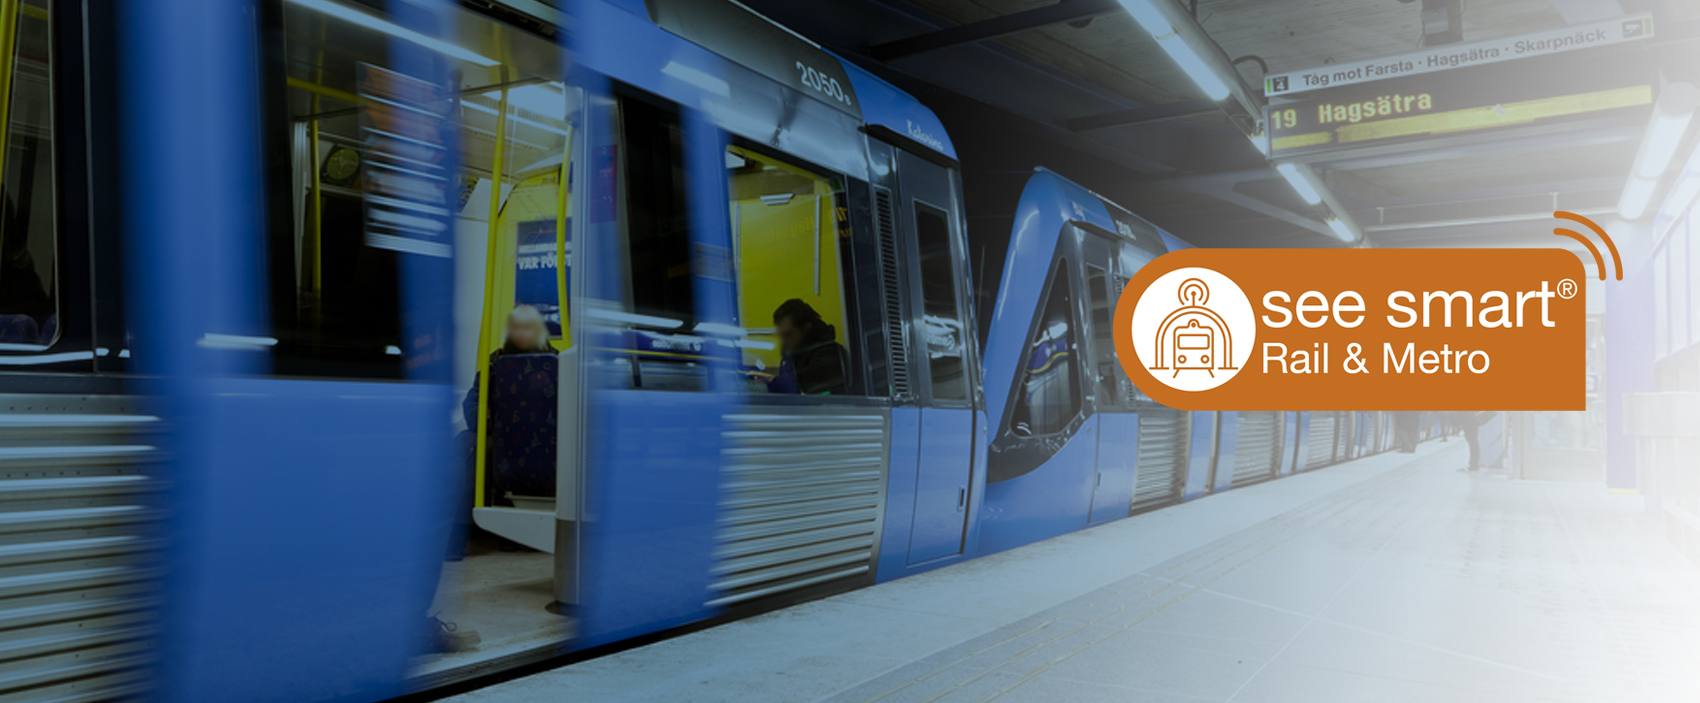 See smart rail & metro- cost-effective radio coverage solutions for railway tunnels and metro